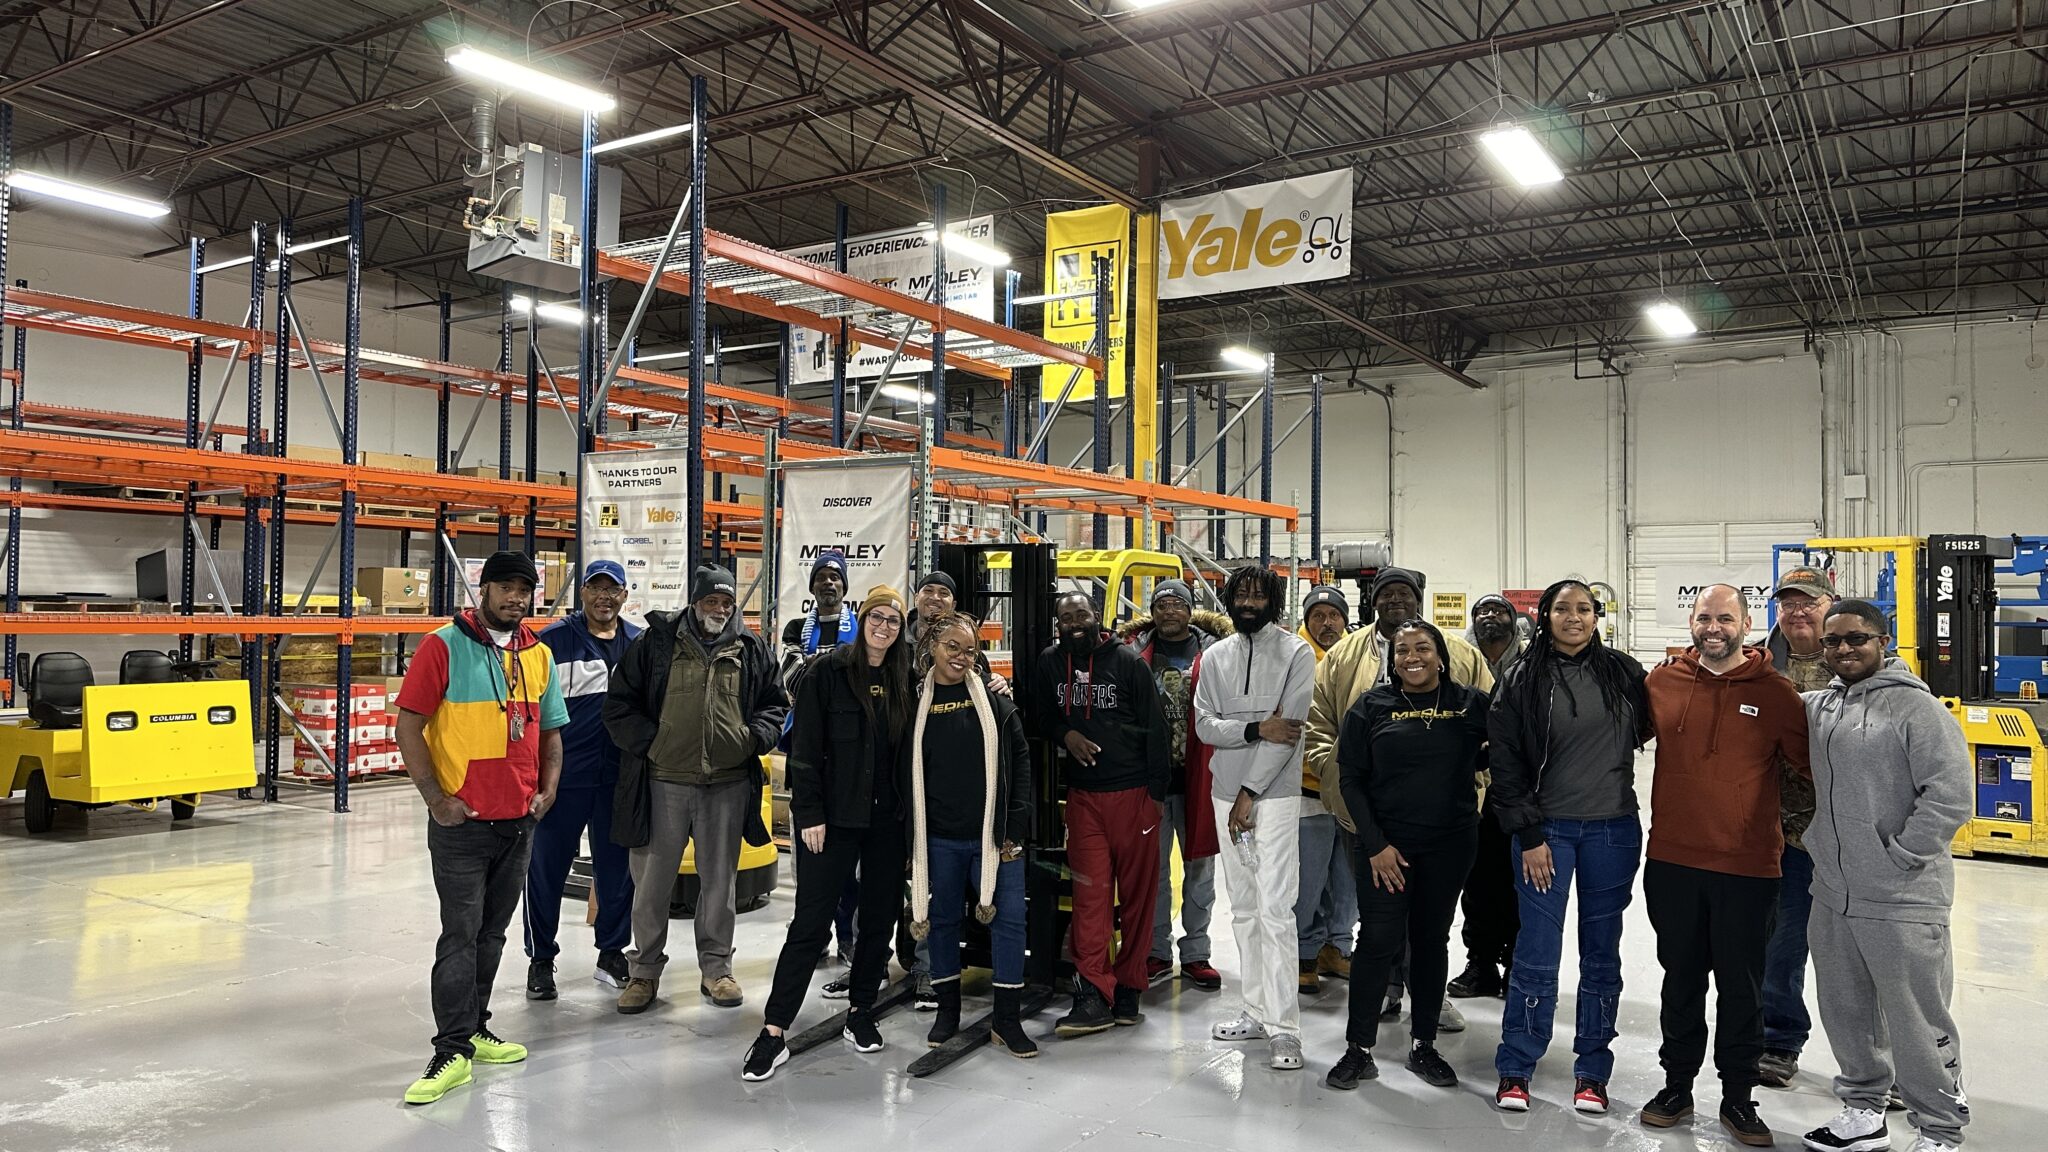 Great group of Forklift Operator Familiarization School Students and volunteers inside Medley's newly redesigned Customer Experience and Training Center